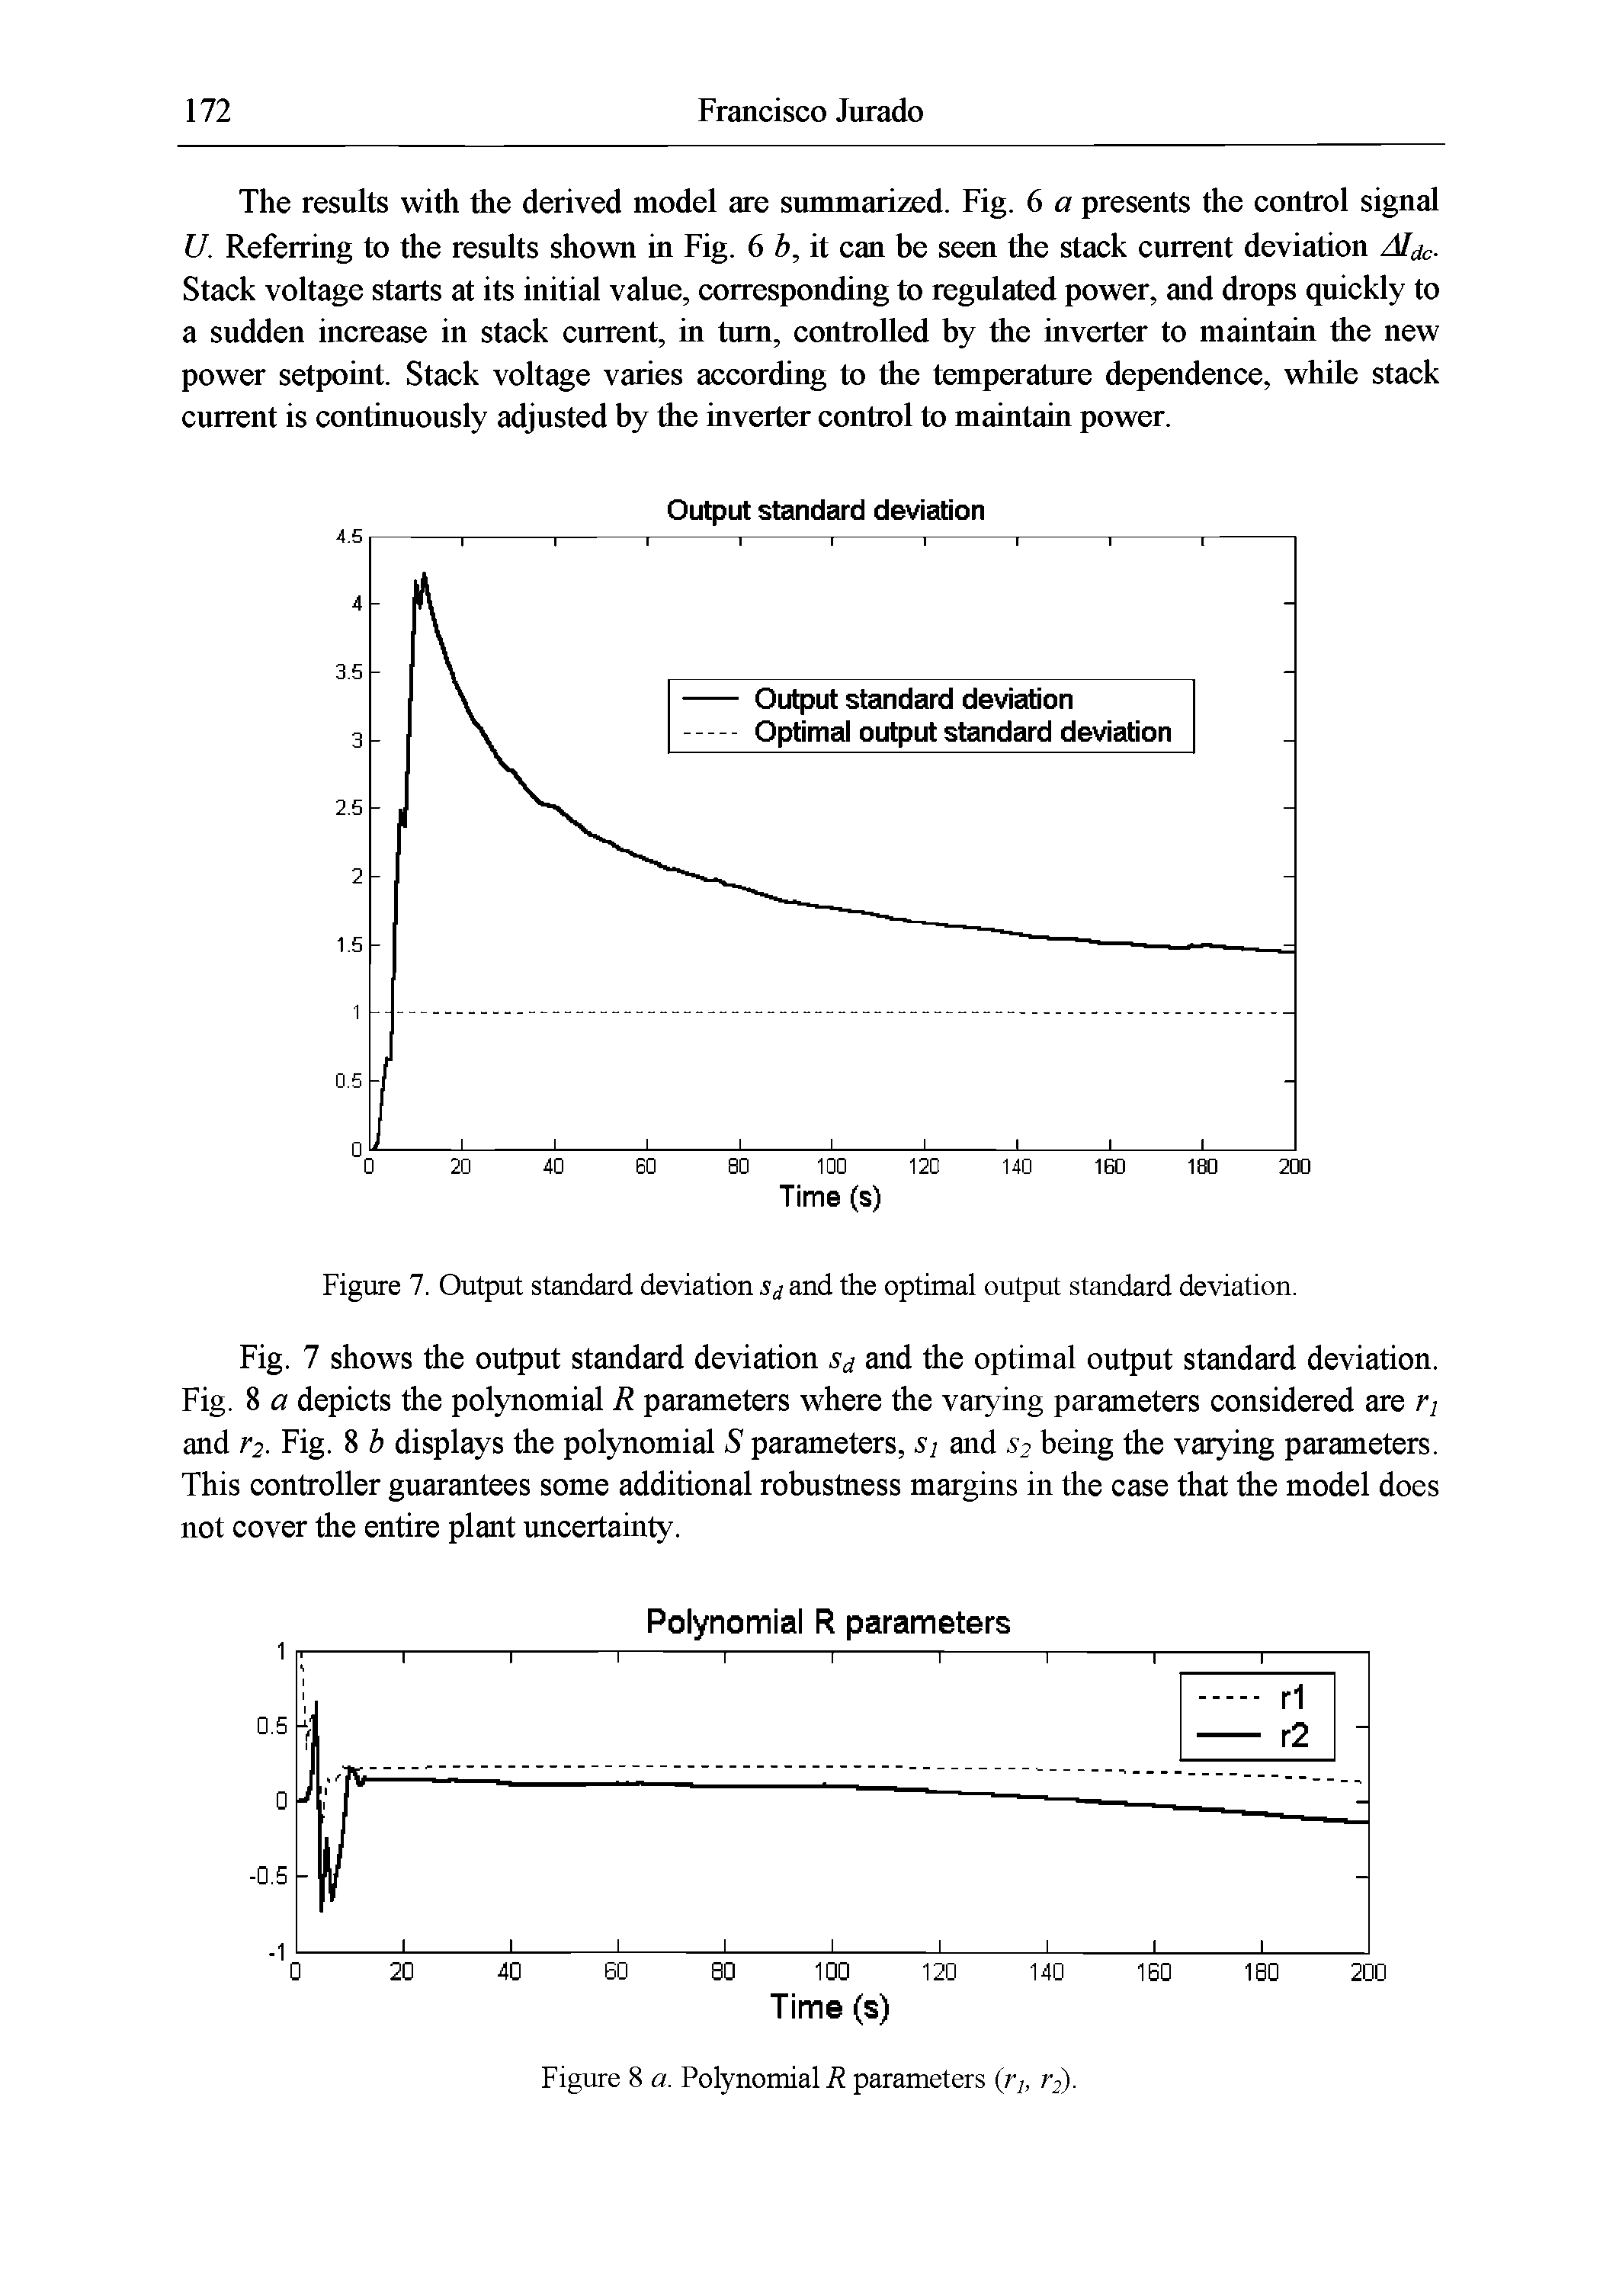 Figure 7. Output standard deviation Sd and the optimal output standard deviation.